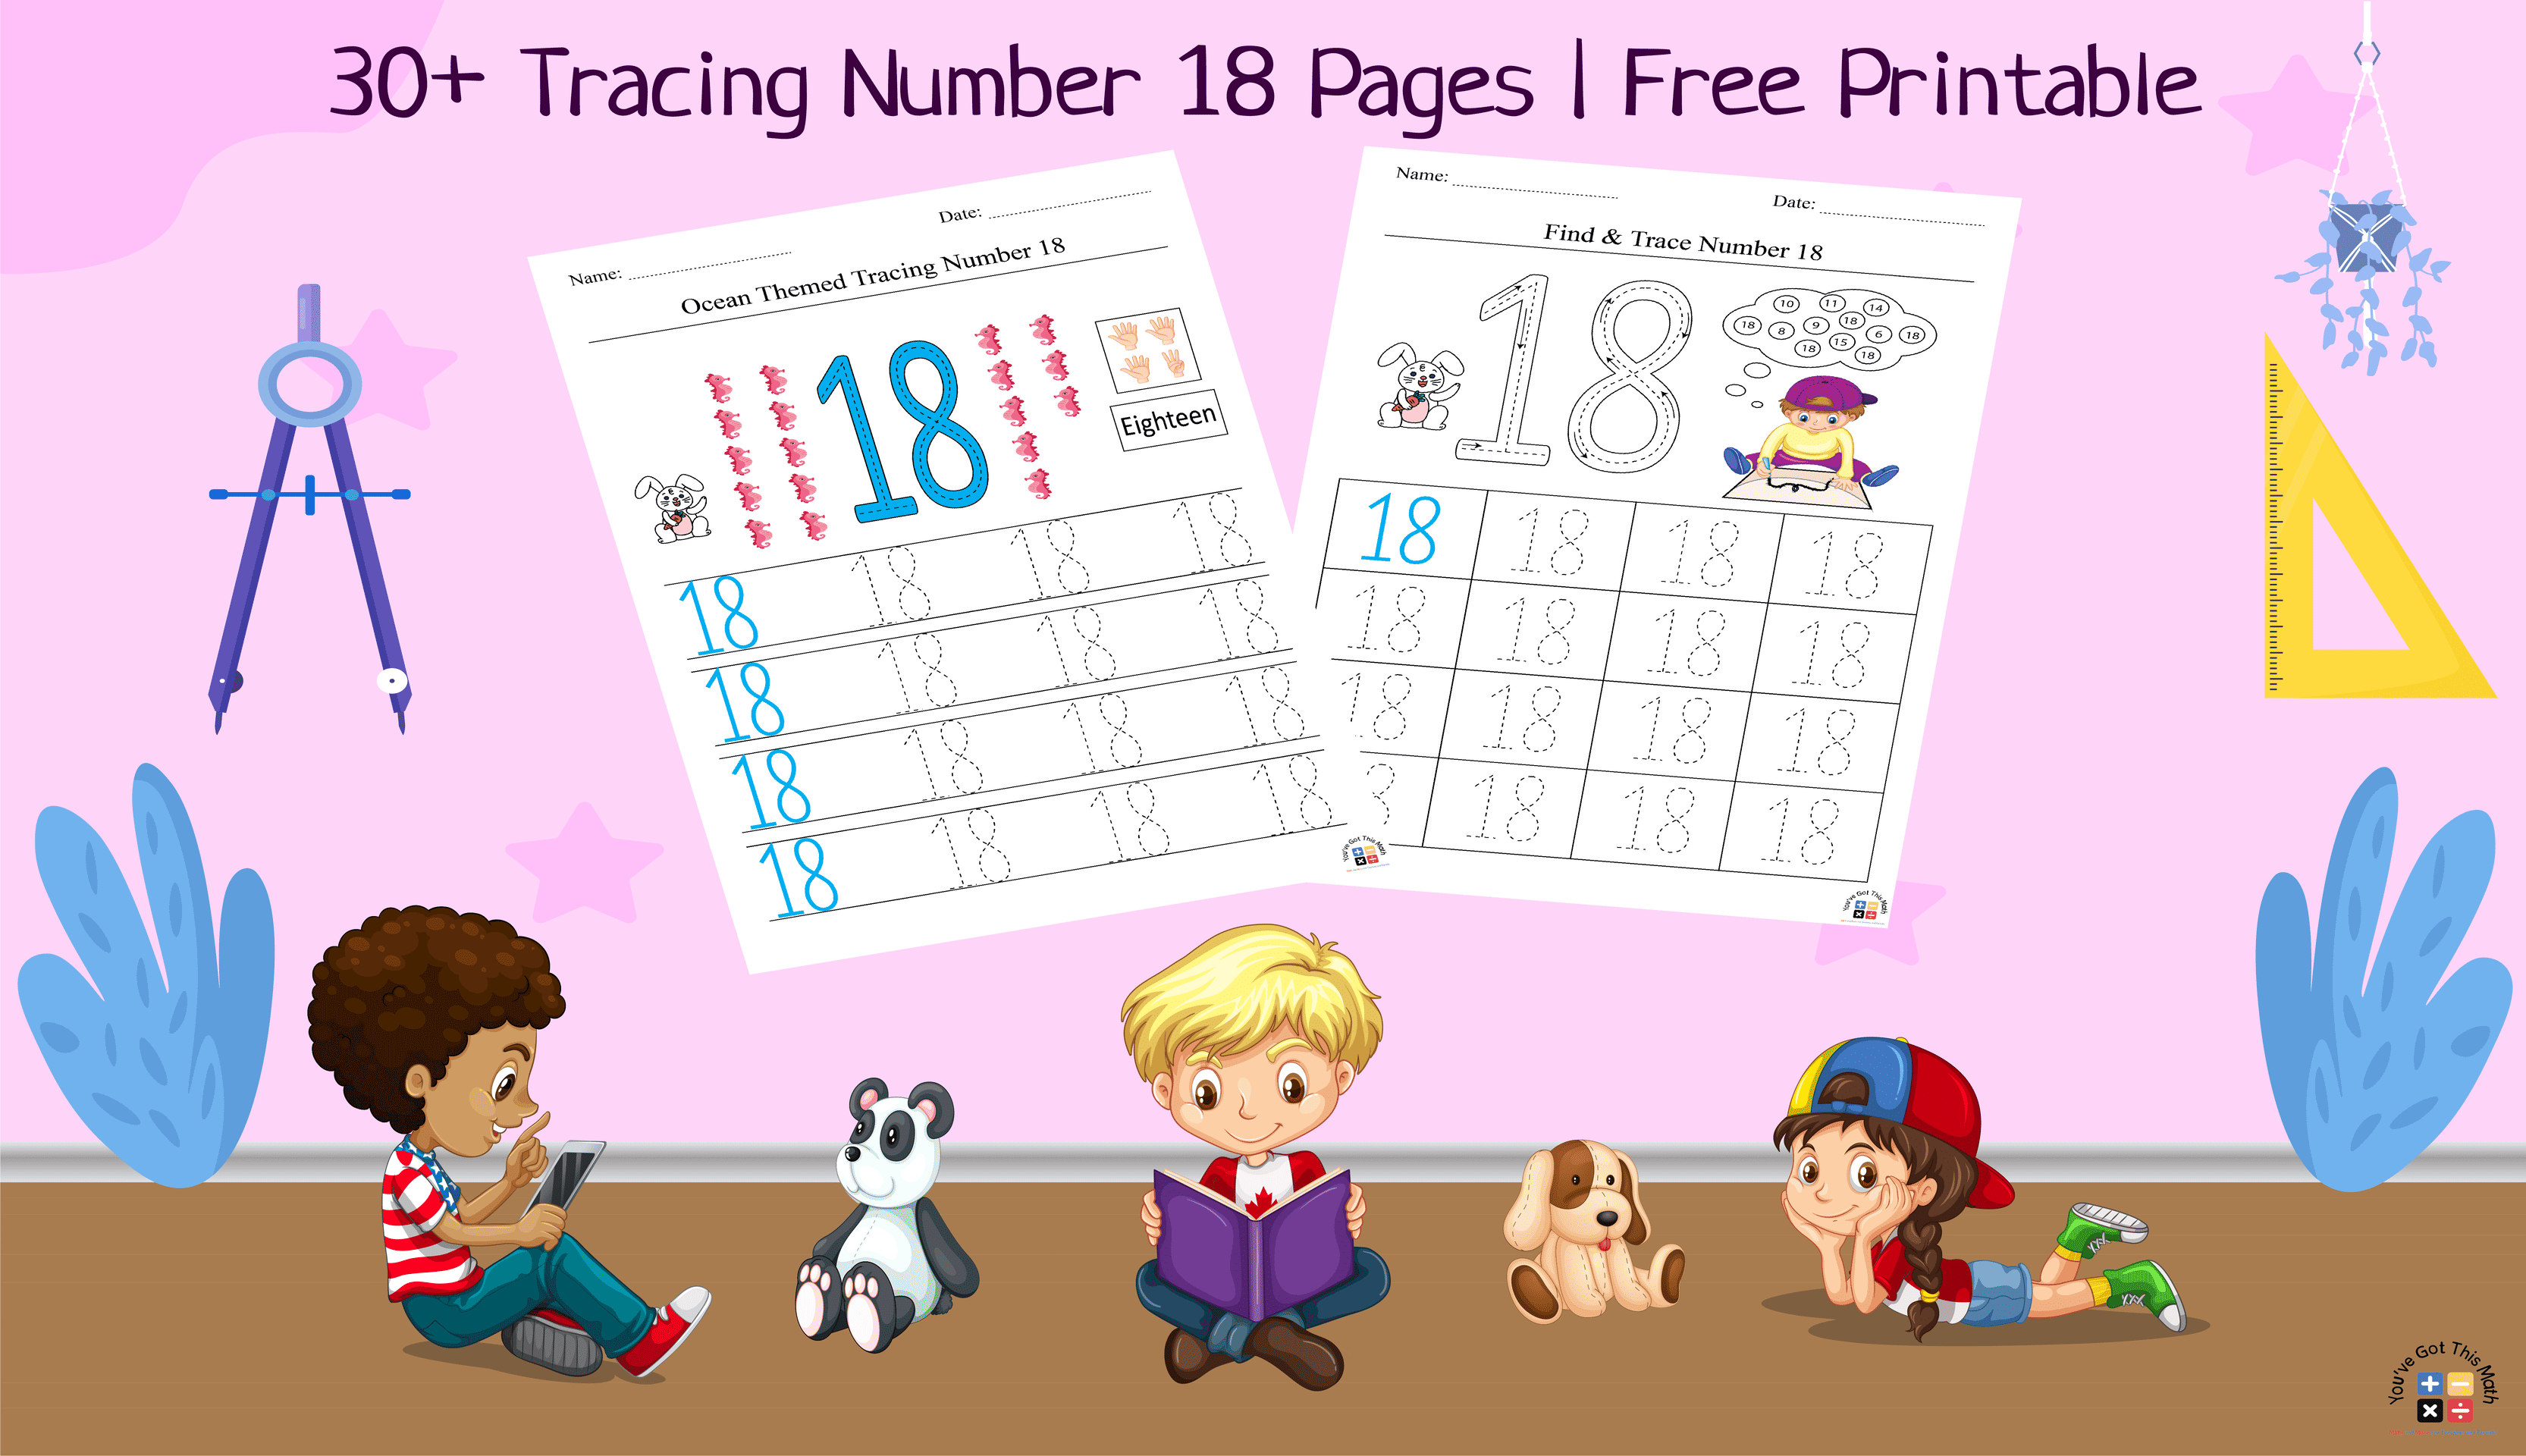 30+ Tracing Number 18 Pages | Free Printable